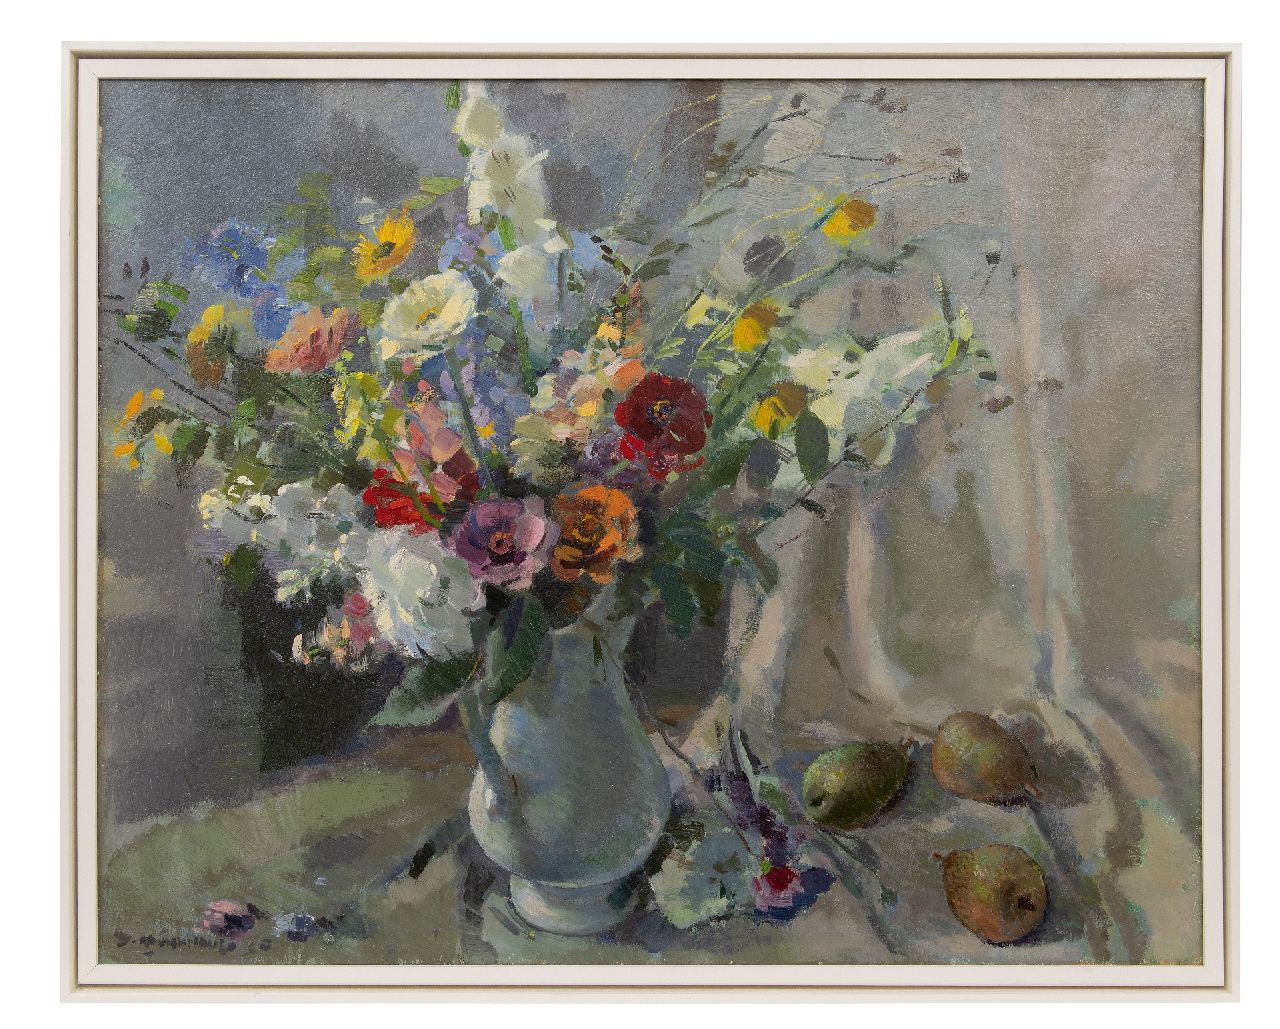 Mühlhaus D.  | Daniël 'Daan' Mühlhaus | Paintings offered for sale | Still life with summer flowers and pears, oil on canvas 80.5 x 100.5 cm, signed l.l.